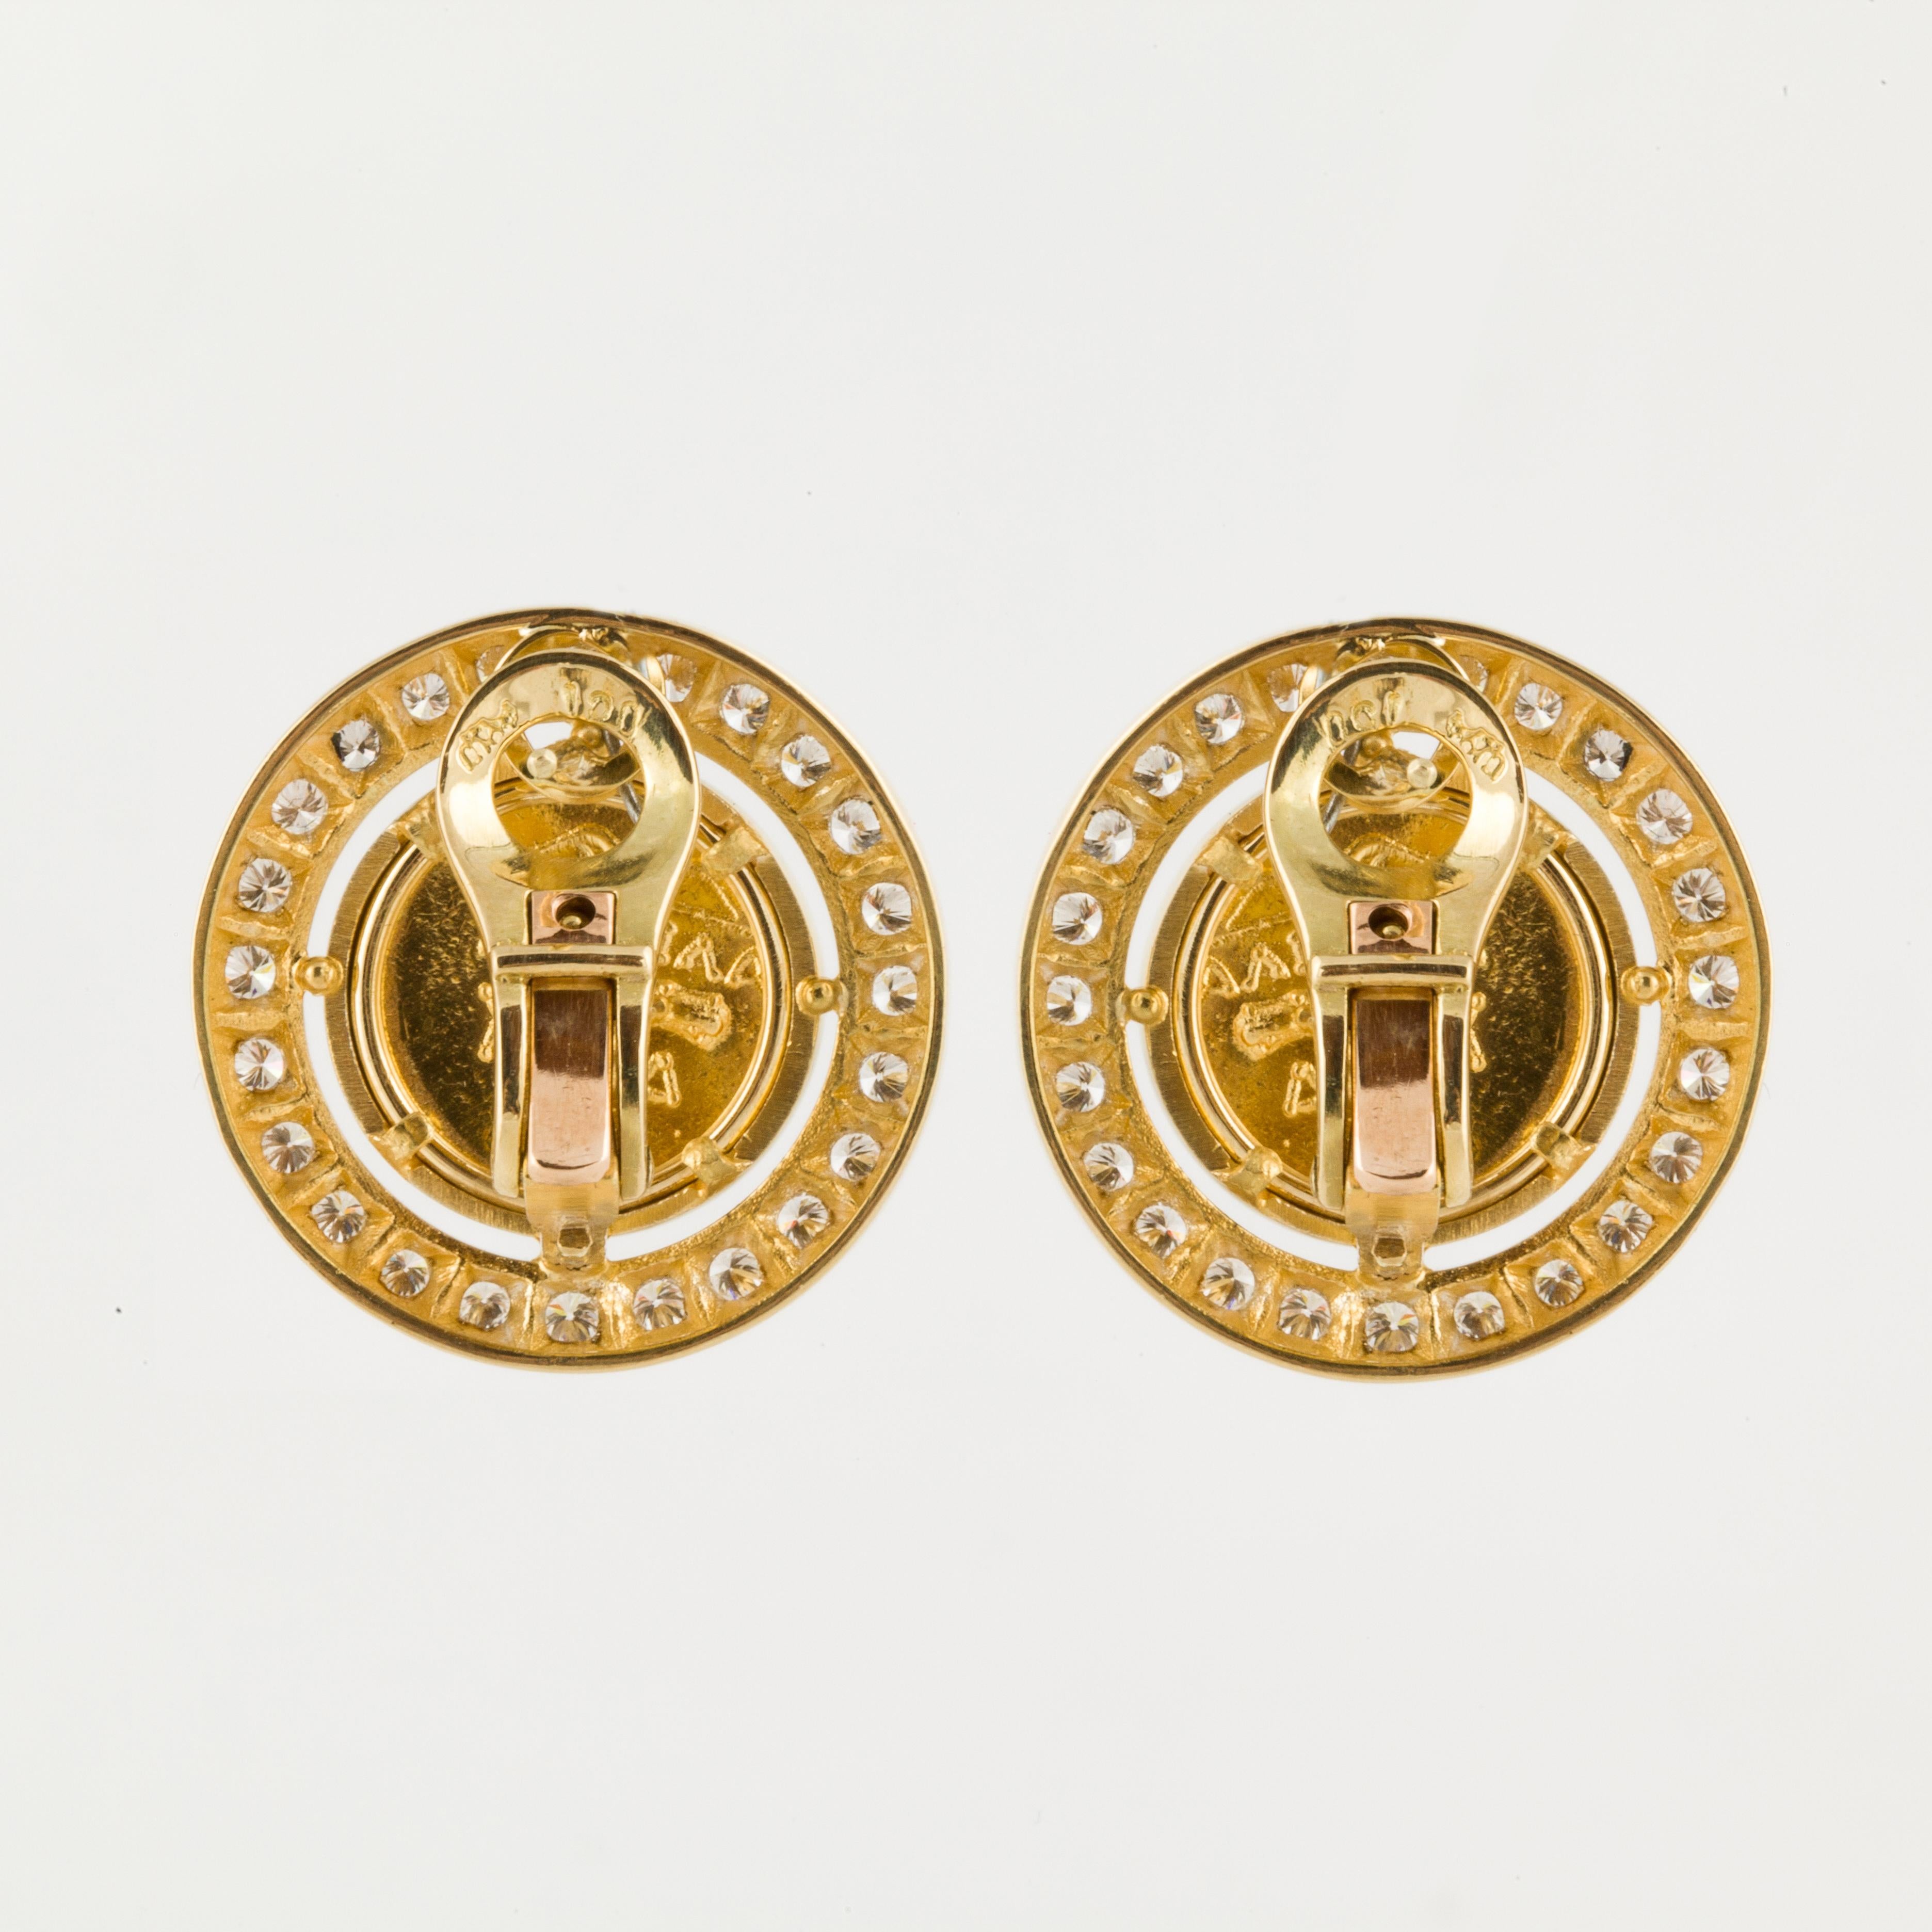 18K yellow gold earrings with replica coins framed with round diamonds.  There are a total of 48 round diamonds weighing 1.45 carats; G-H color and VS clarity.  Measure 7/8 inches in diameter.  For pierced ears with a lever back.